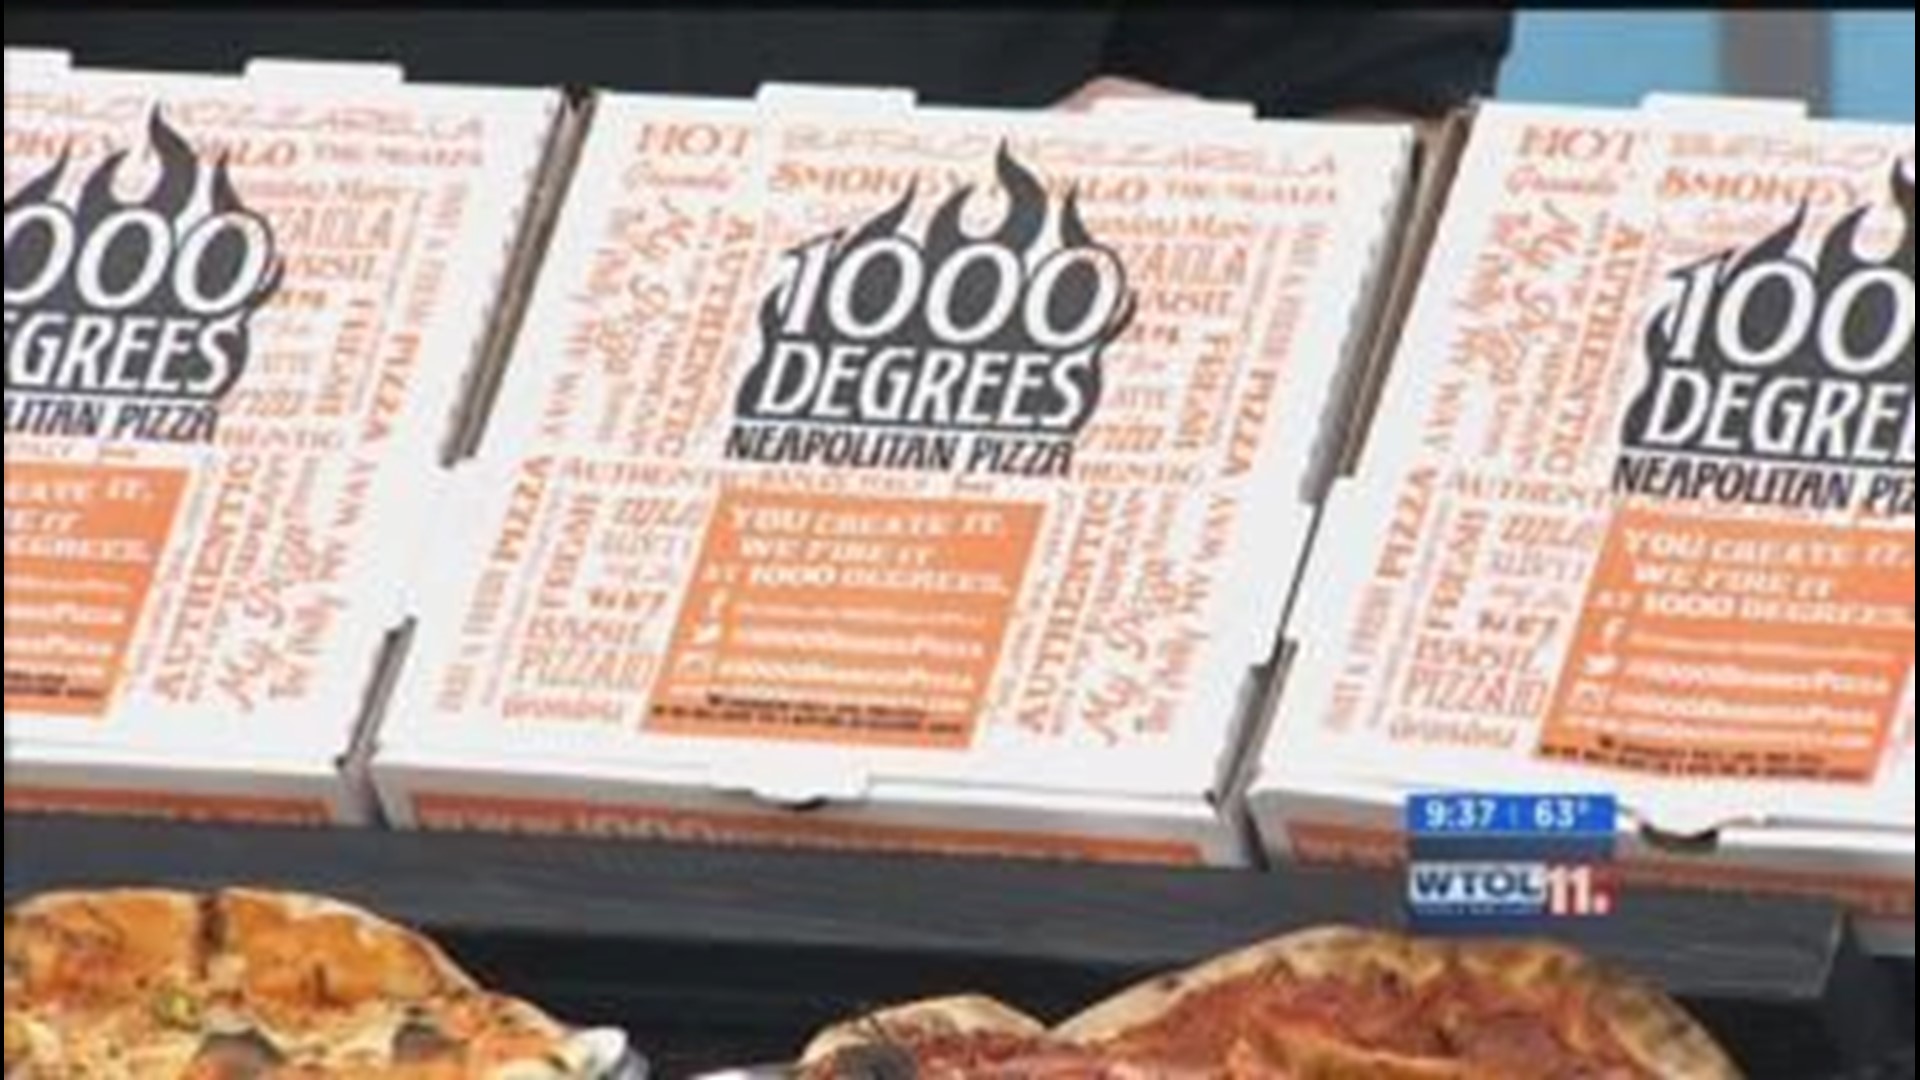 Kevin Orians from 1000 Degrees Neapolitan Pizza joins WTOL 11 Your Day